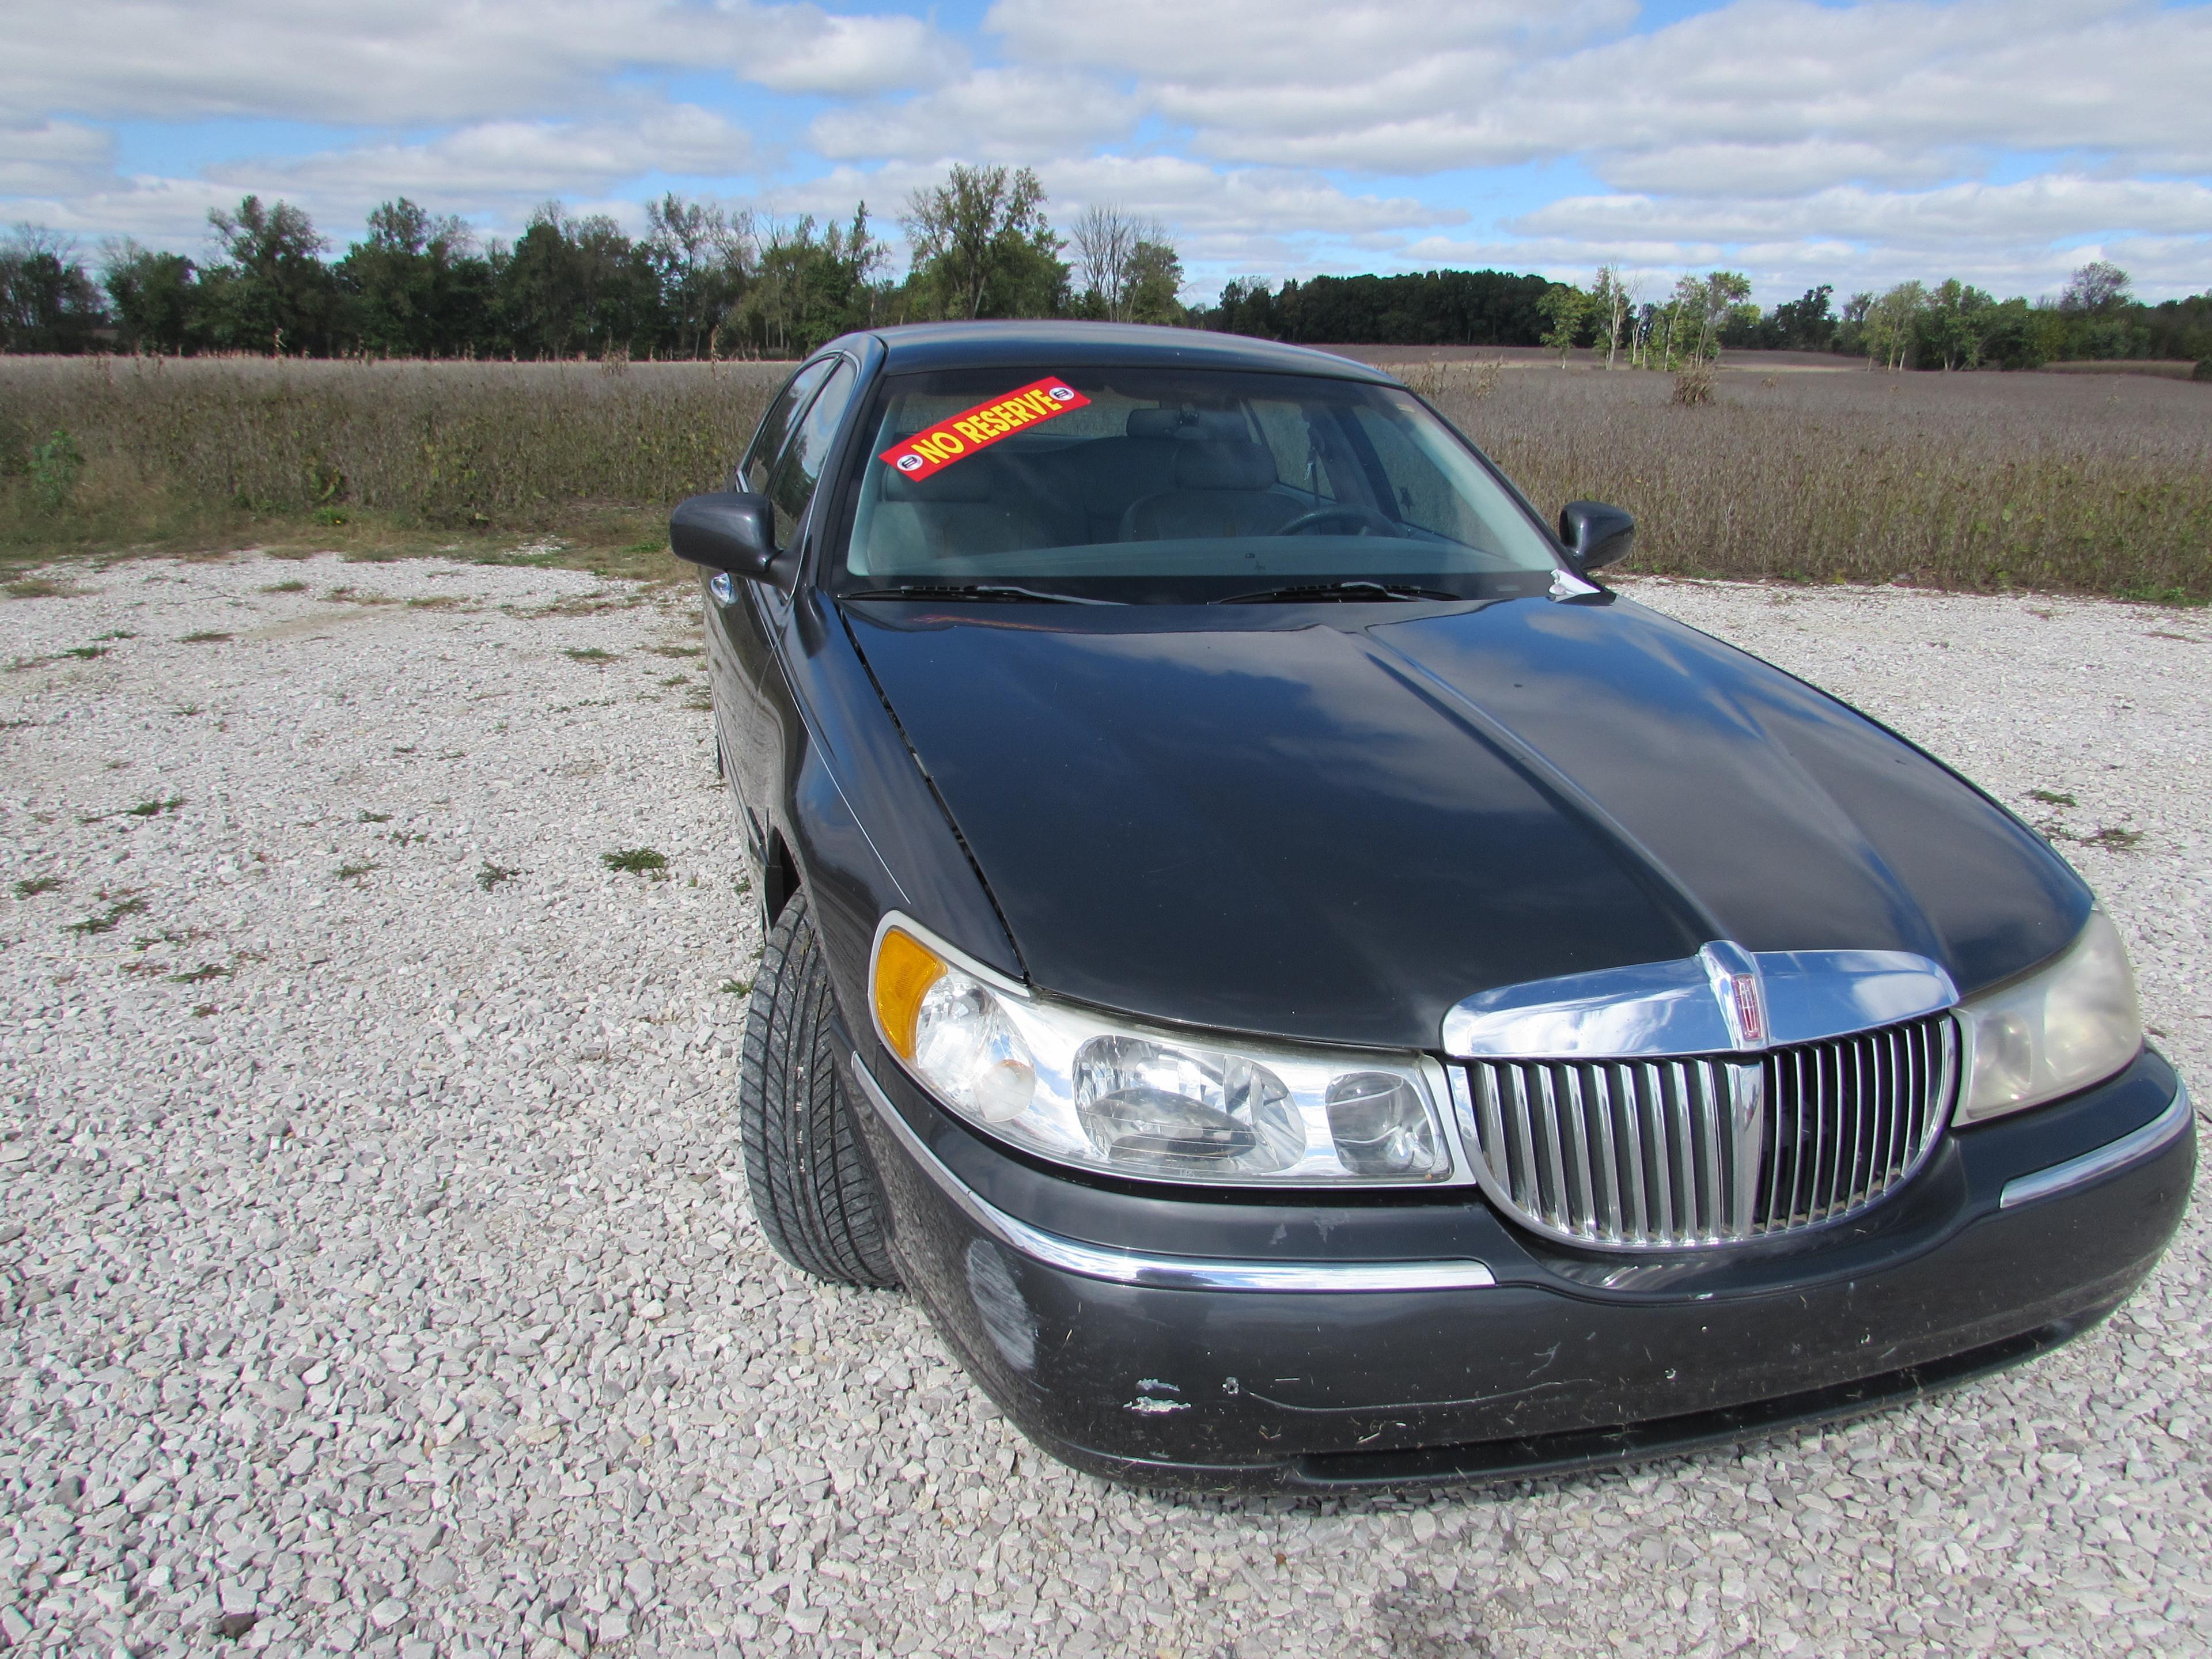 1998 Lincoln Town Car Miles: Exempt